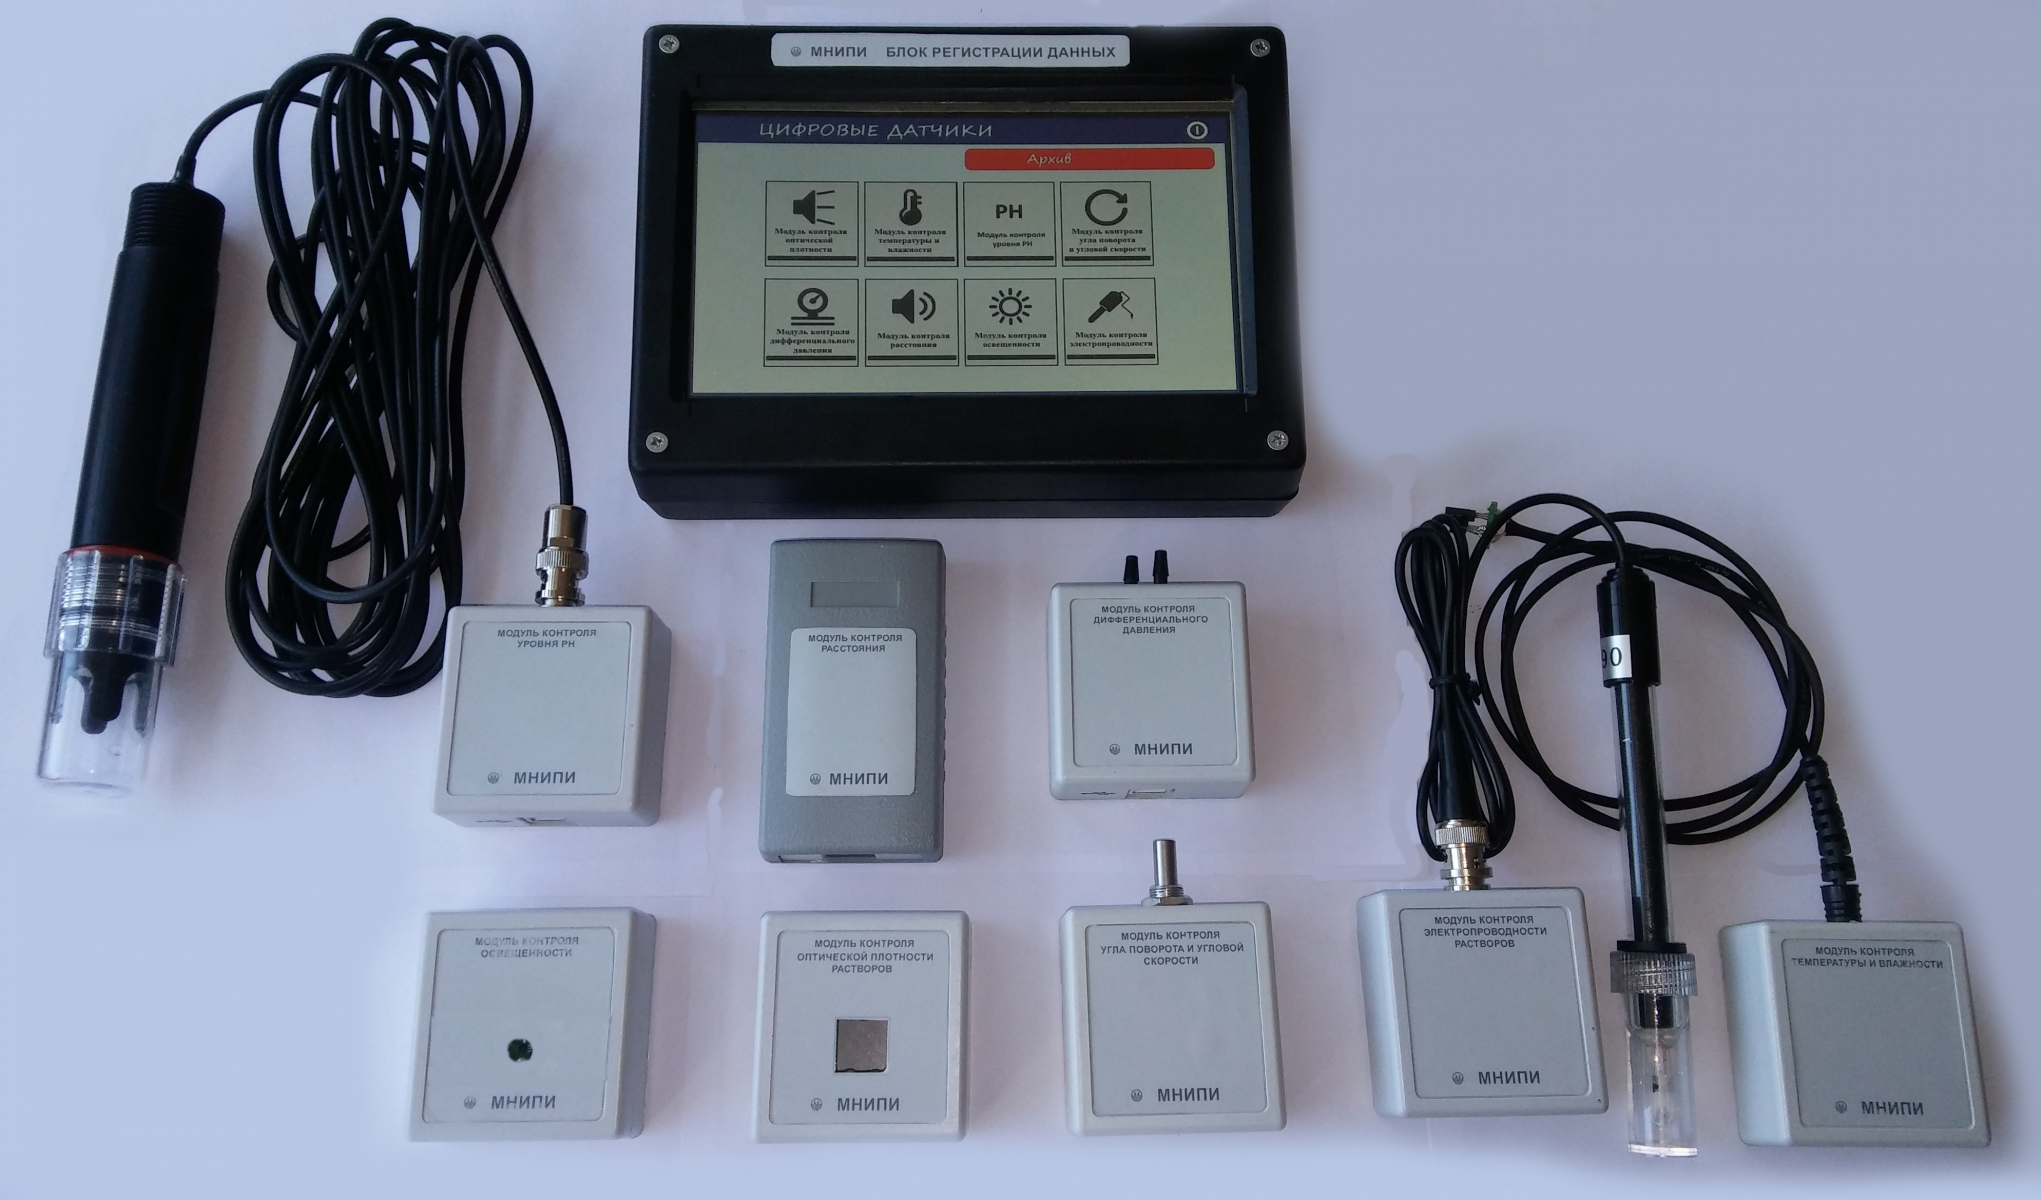 A set of hardware and software tools for monitoring systems of parameters of objects and the environment